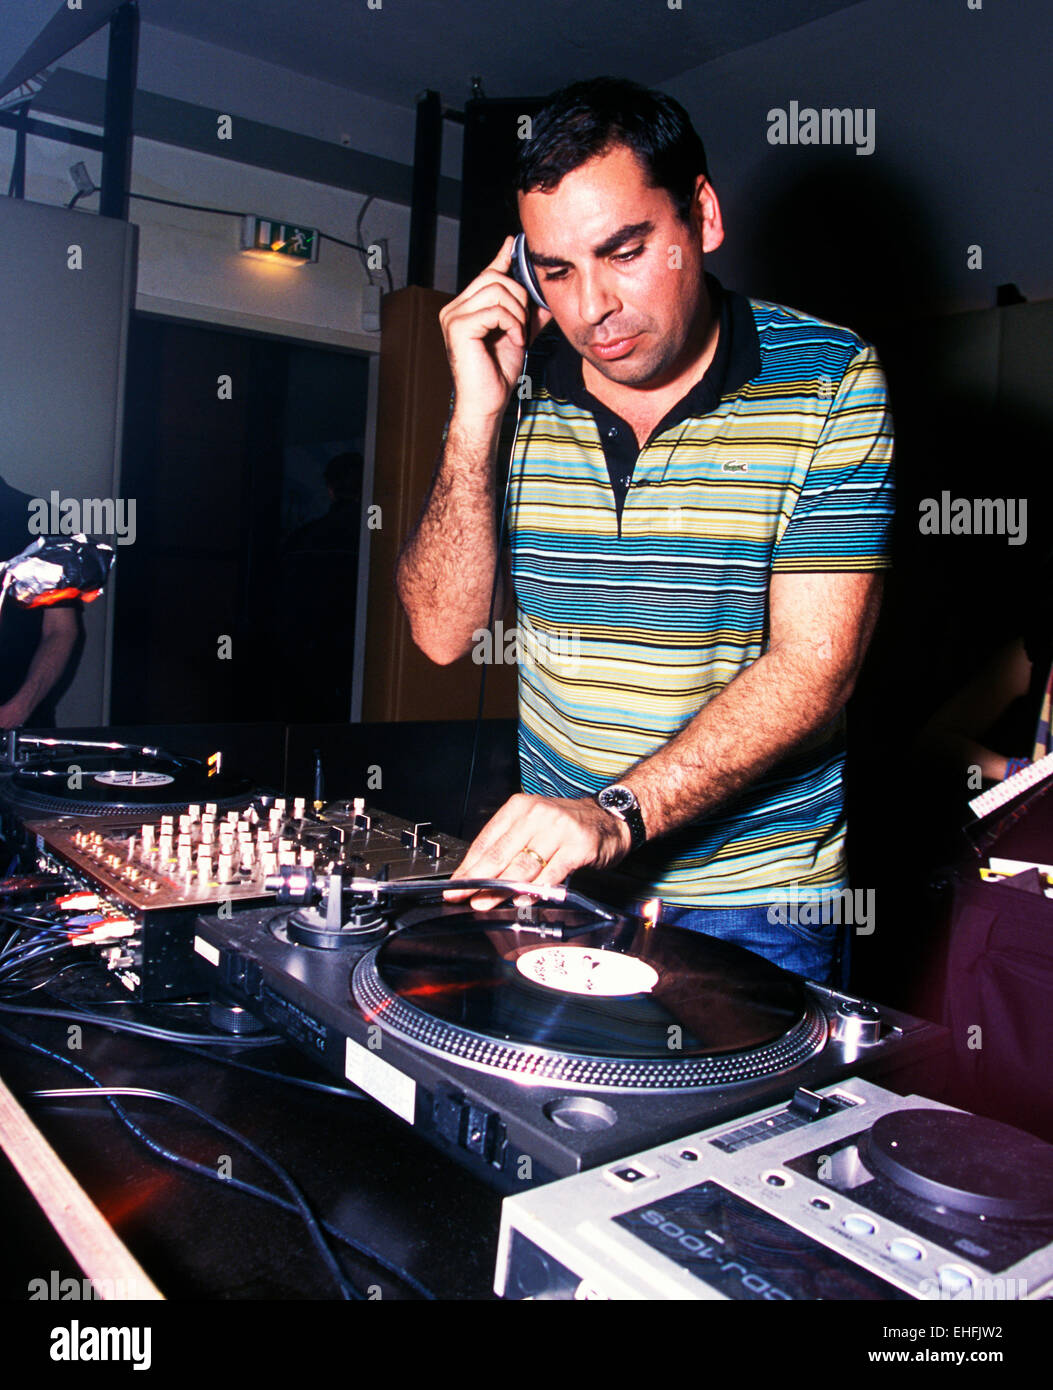 Rob Mello DJing at Come Shake The Whole at Watergate in Berlin Germany. Stock Photo